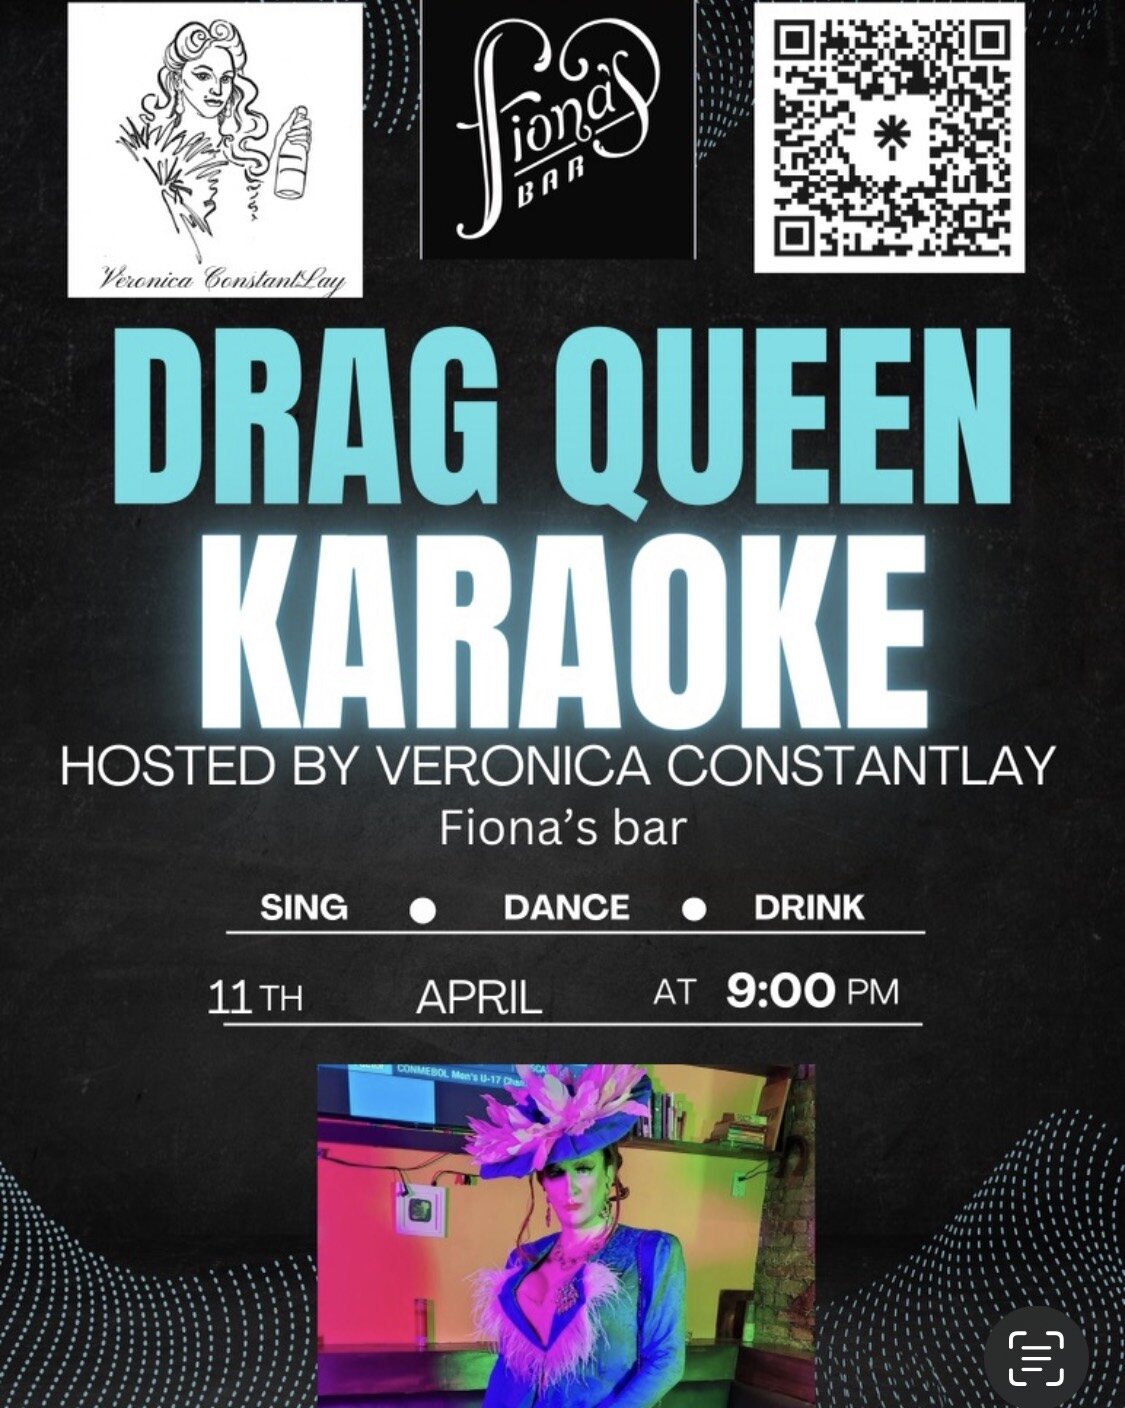 Spring is in the air, and like the song bird that you are, come lift up your voice and SING SING SING!! Debauchery starts at 9 on Tuesday..get here early for a good seat and a few *bracer* cocktails!